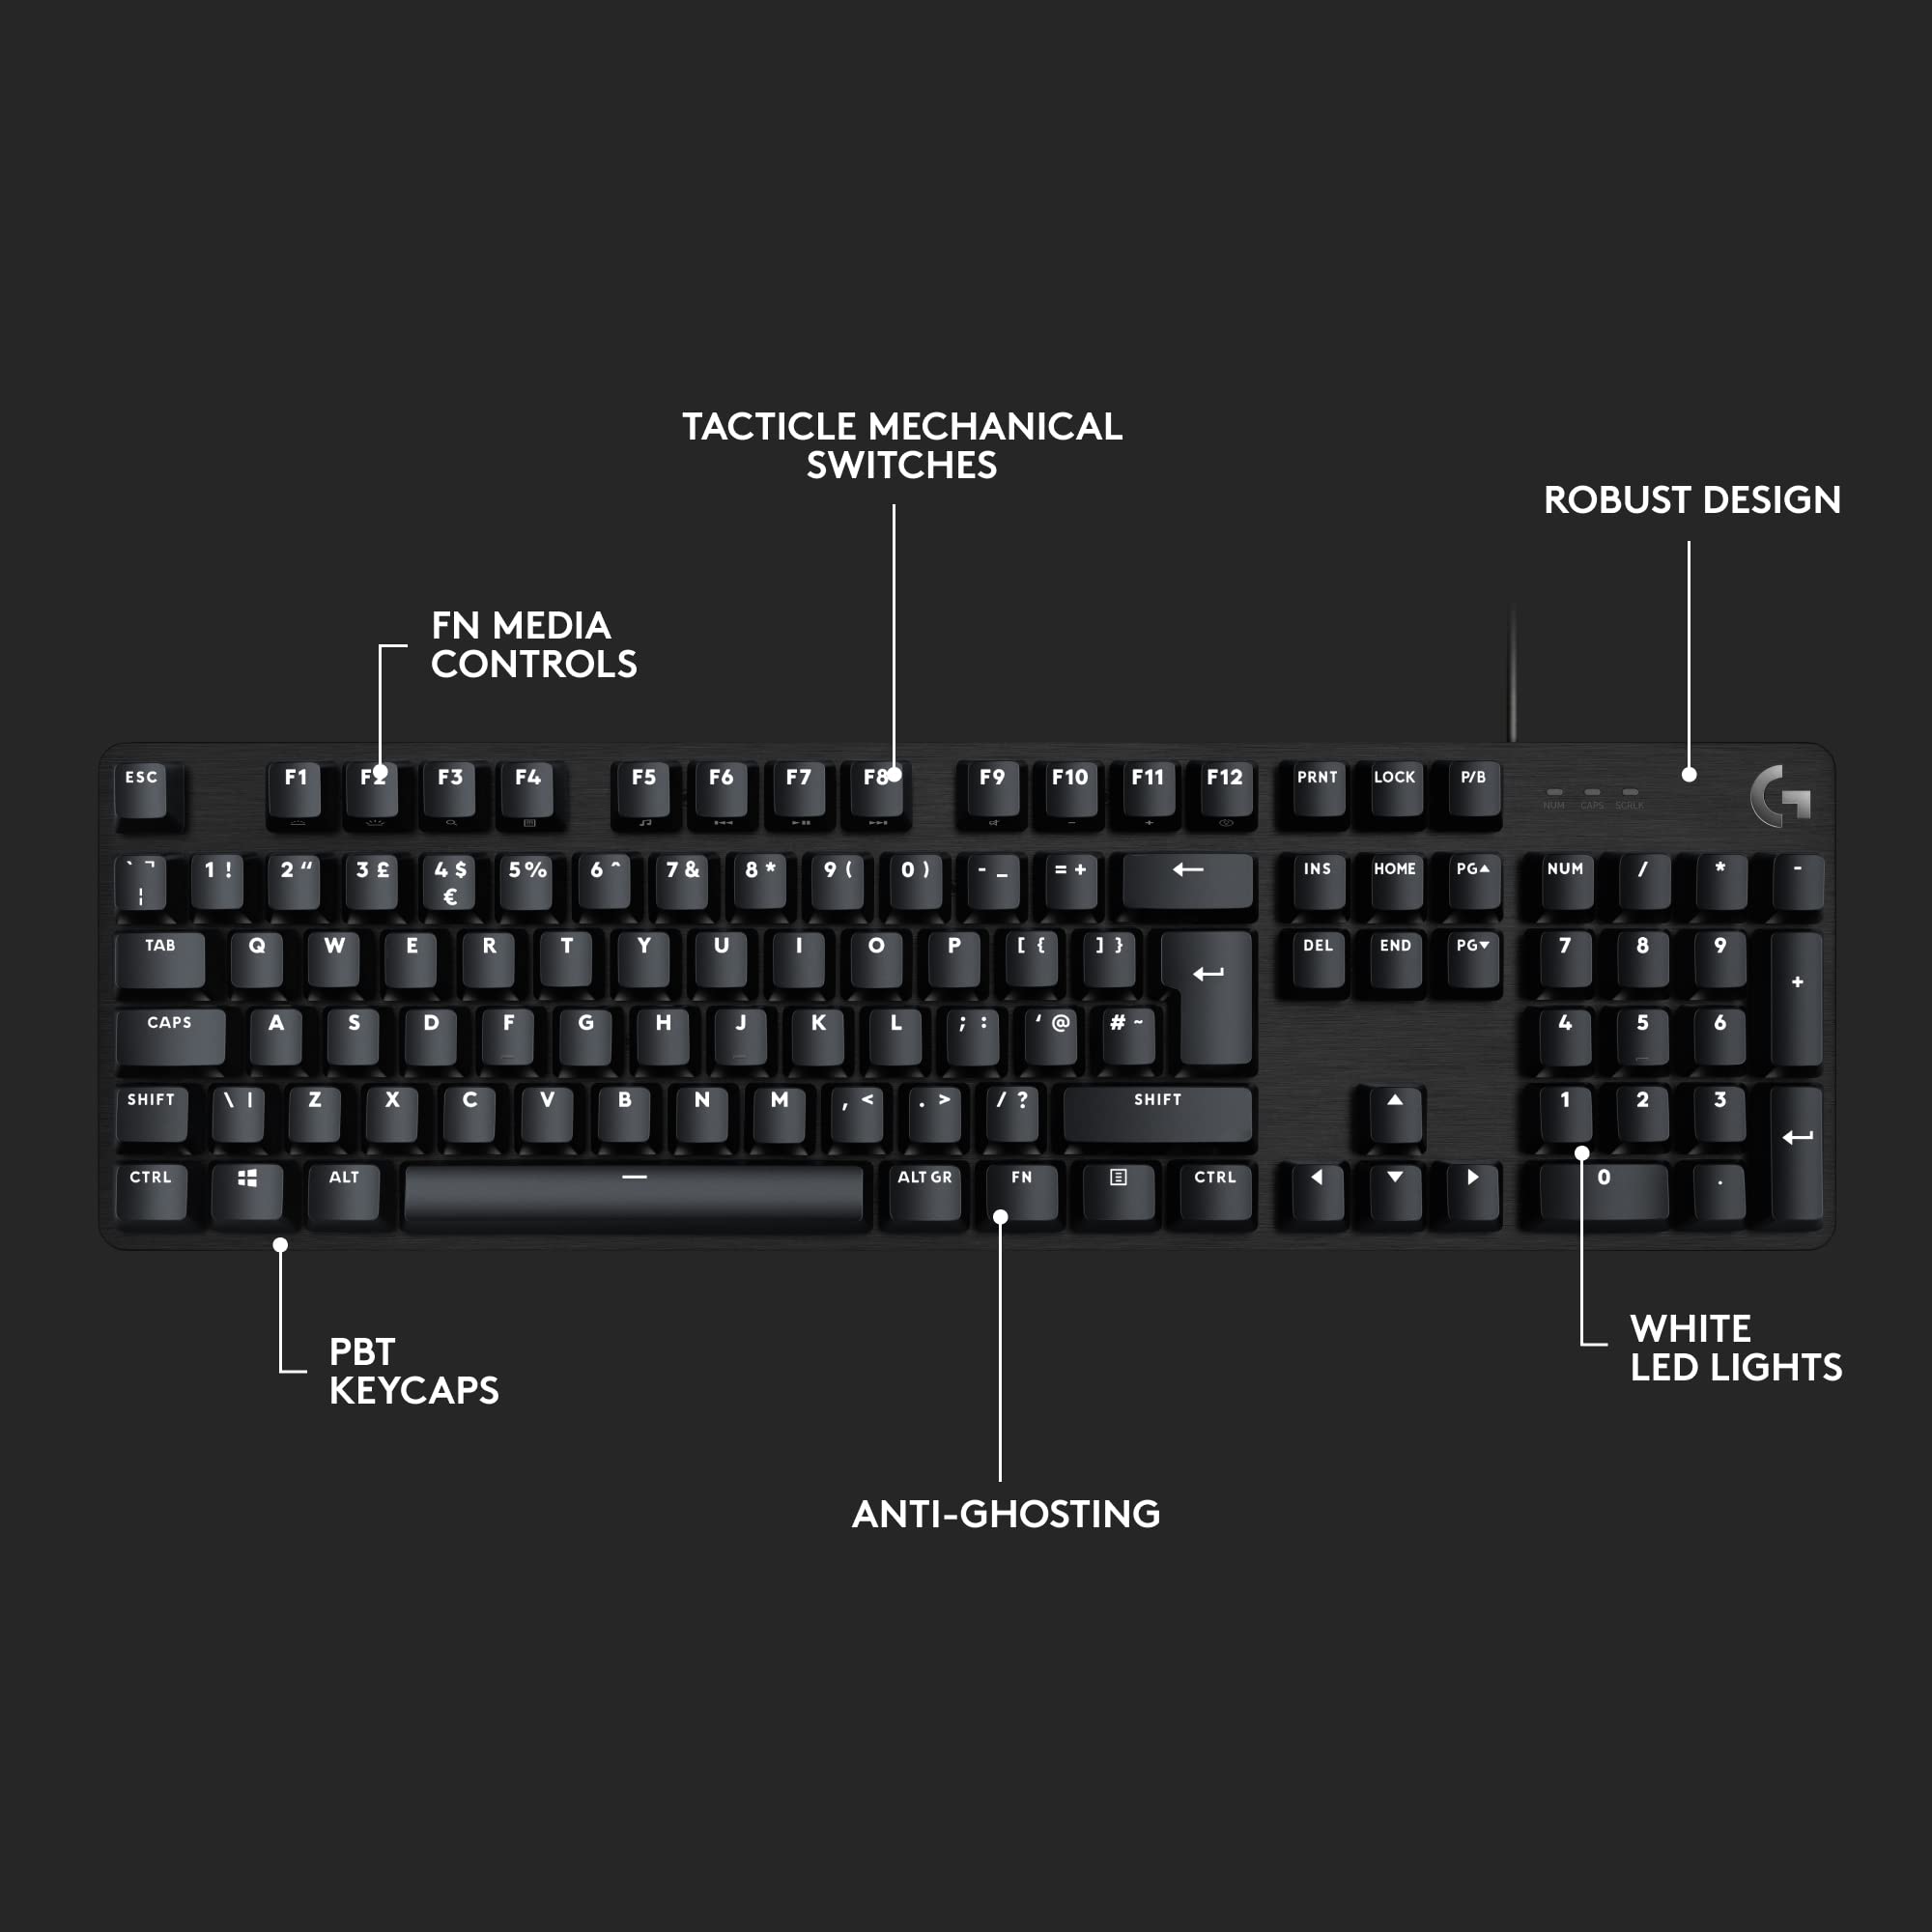 Logitech G413 SE Full-Size Mechanical Gaming Keyboard - Backlit Keyboard with Tactile Mechanical Switches, Anti-Ghosting, Compatible with Windows, macOS, QWERTY UK English Layout - Black